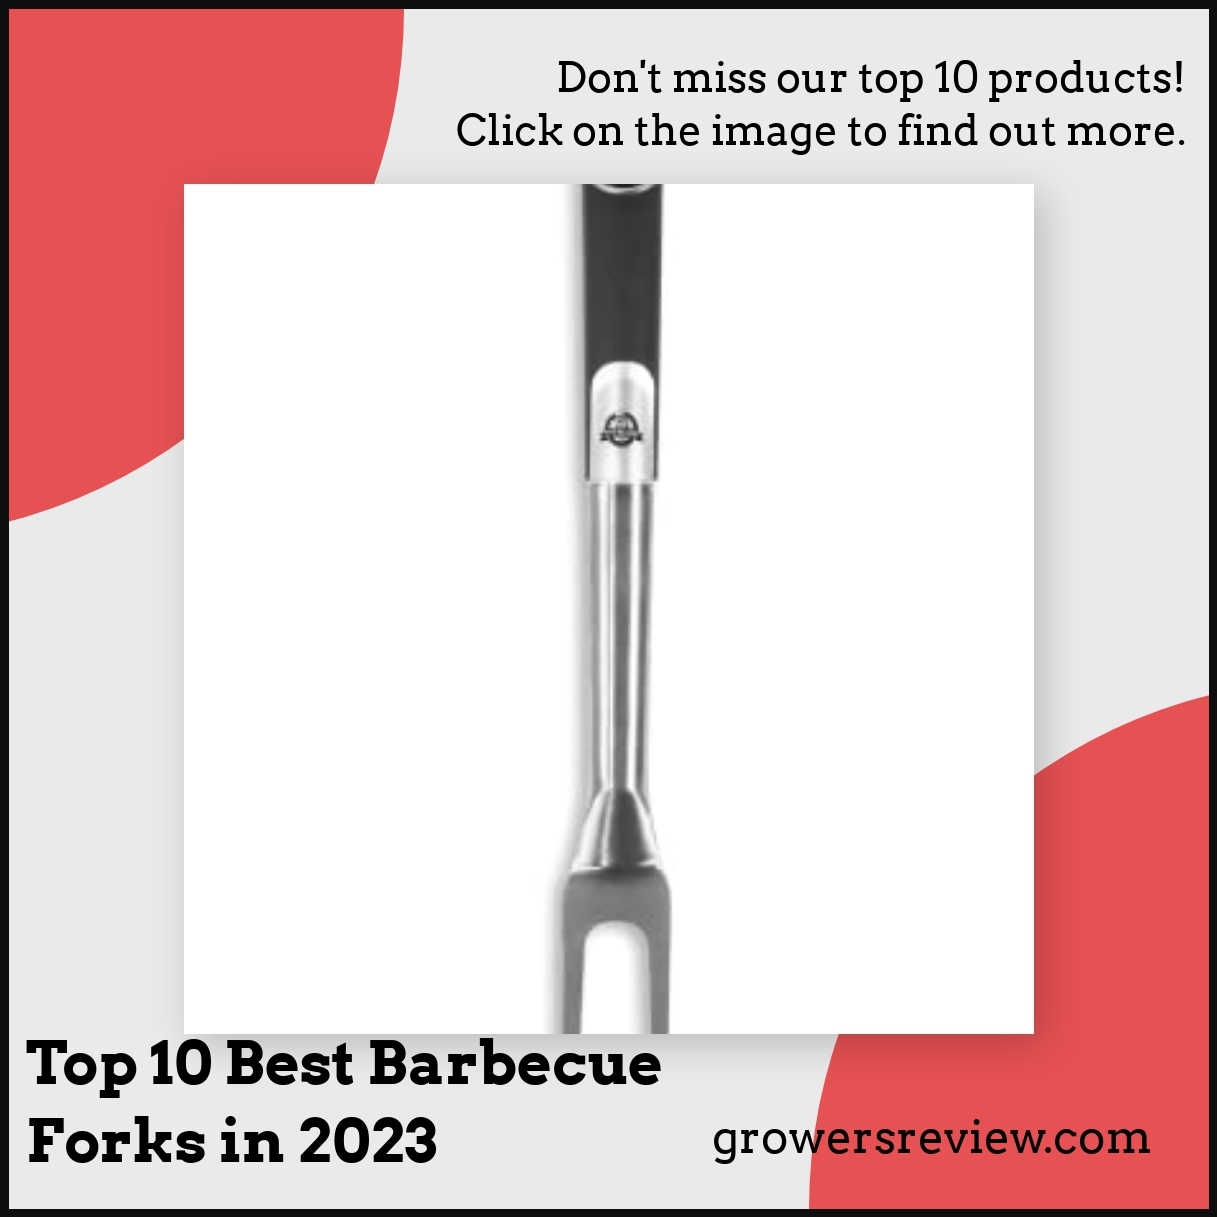 Top 10 Best Barbecue Forks in 2023